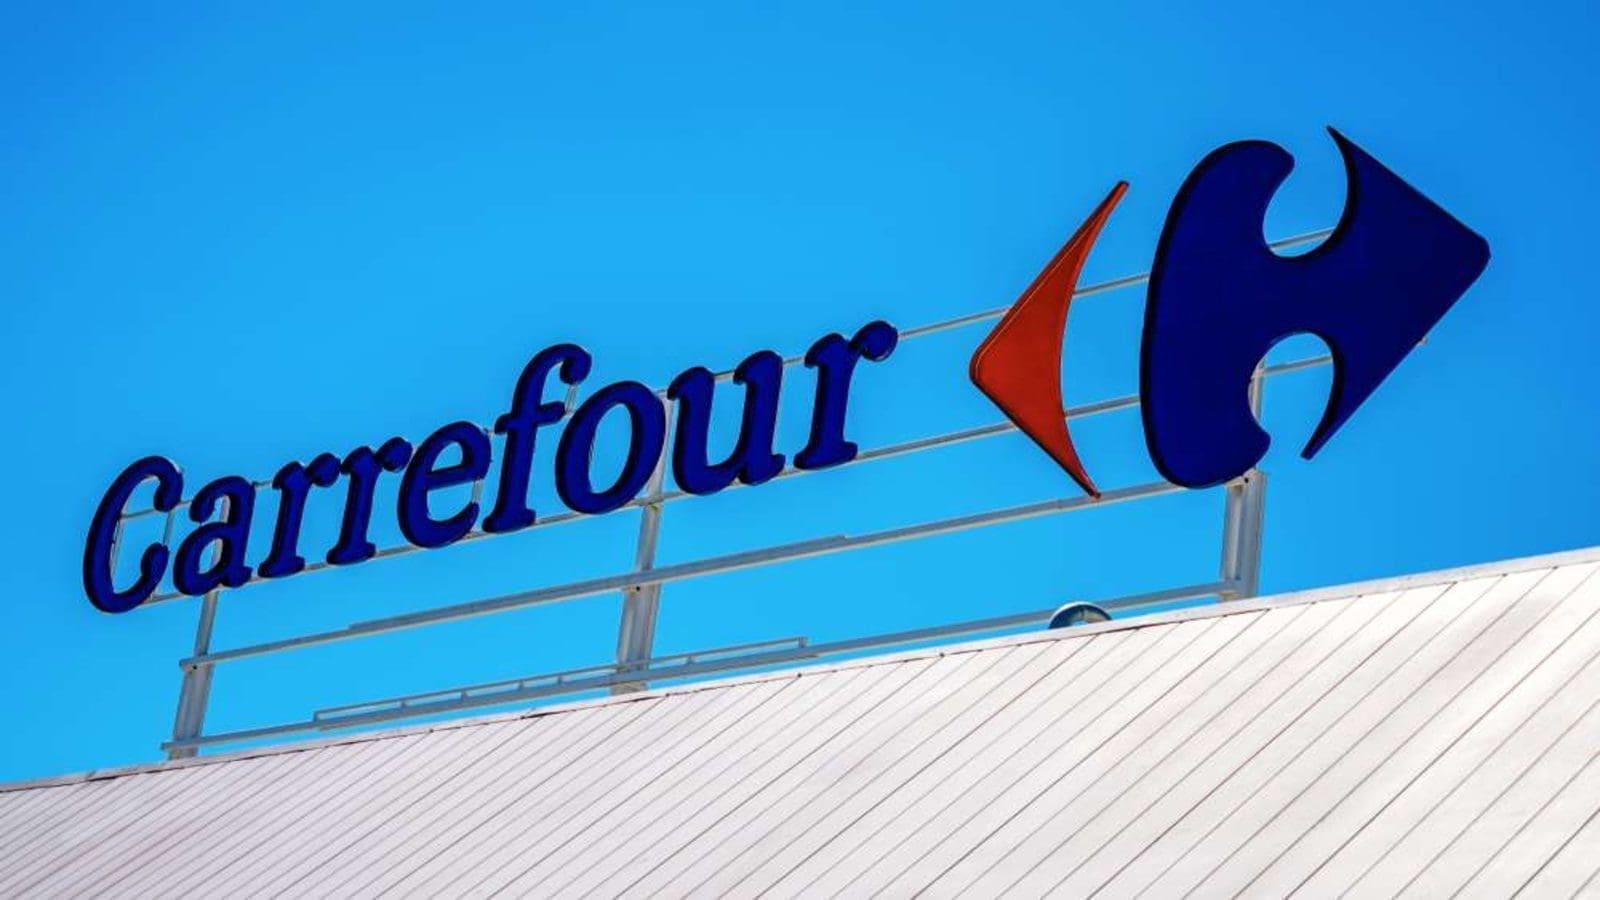 French retailer Carrefour to open shop in Israel in partnership with Electra 